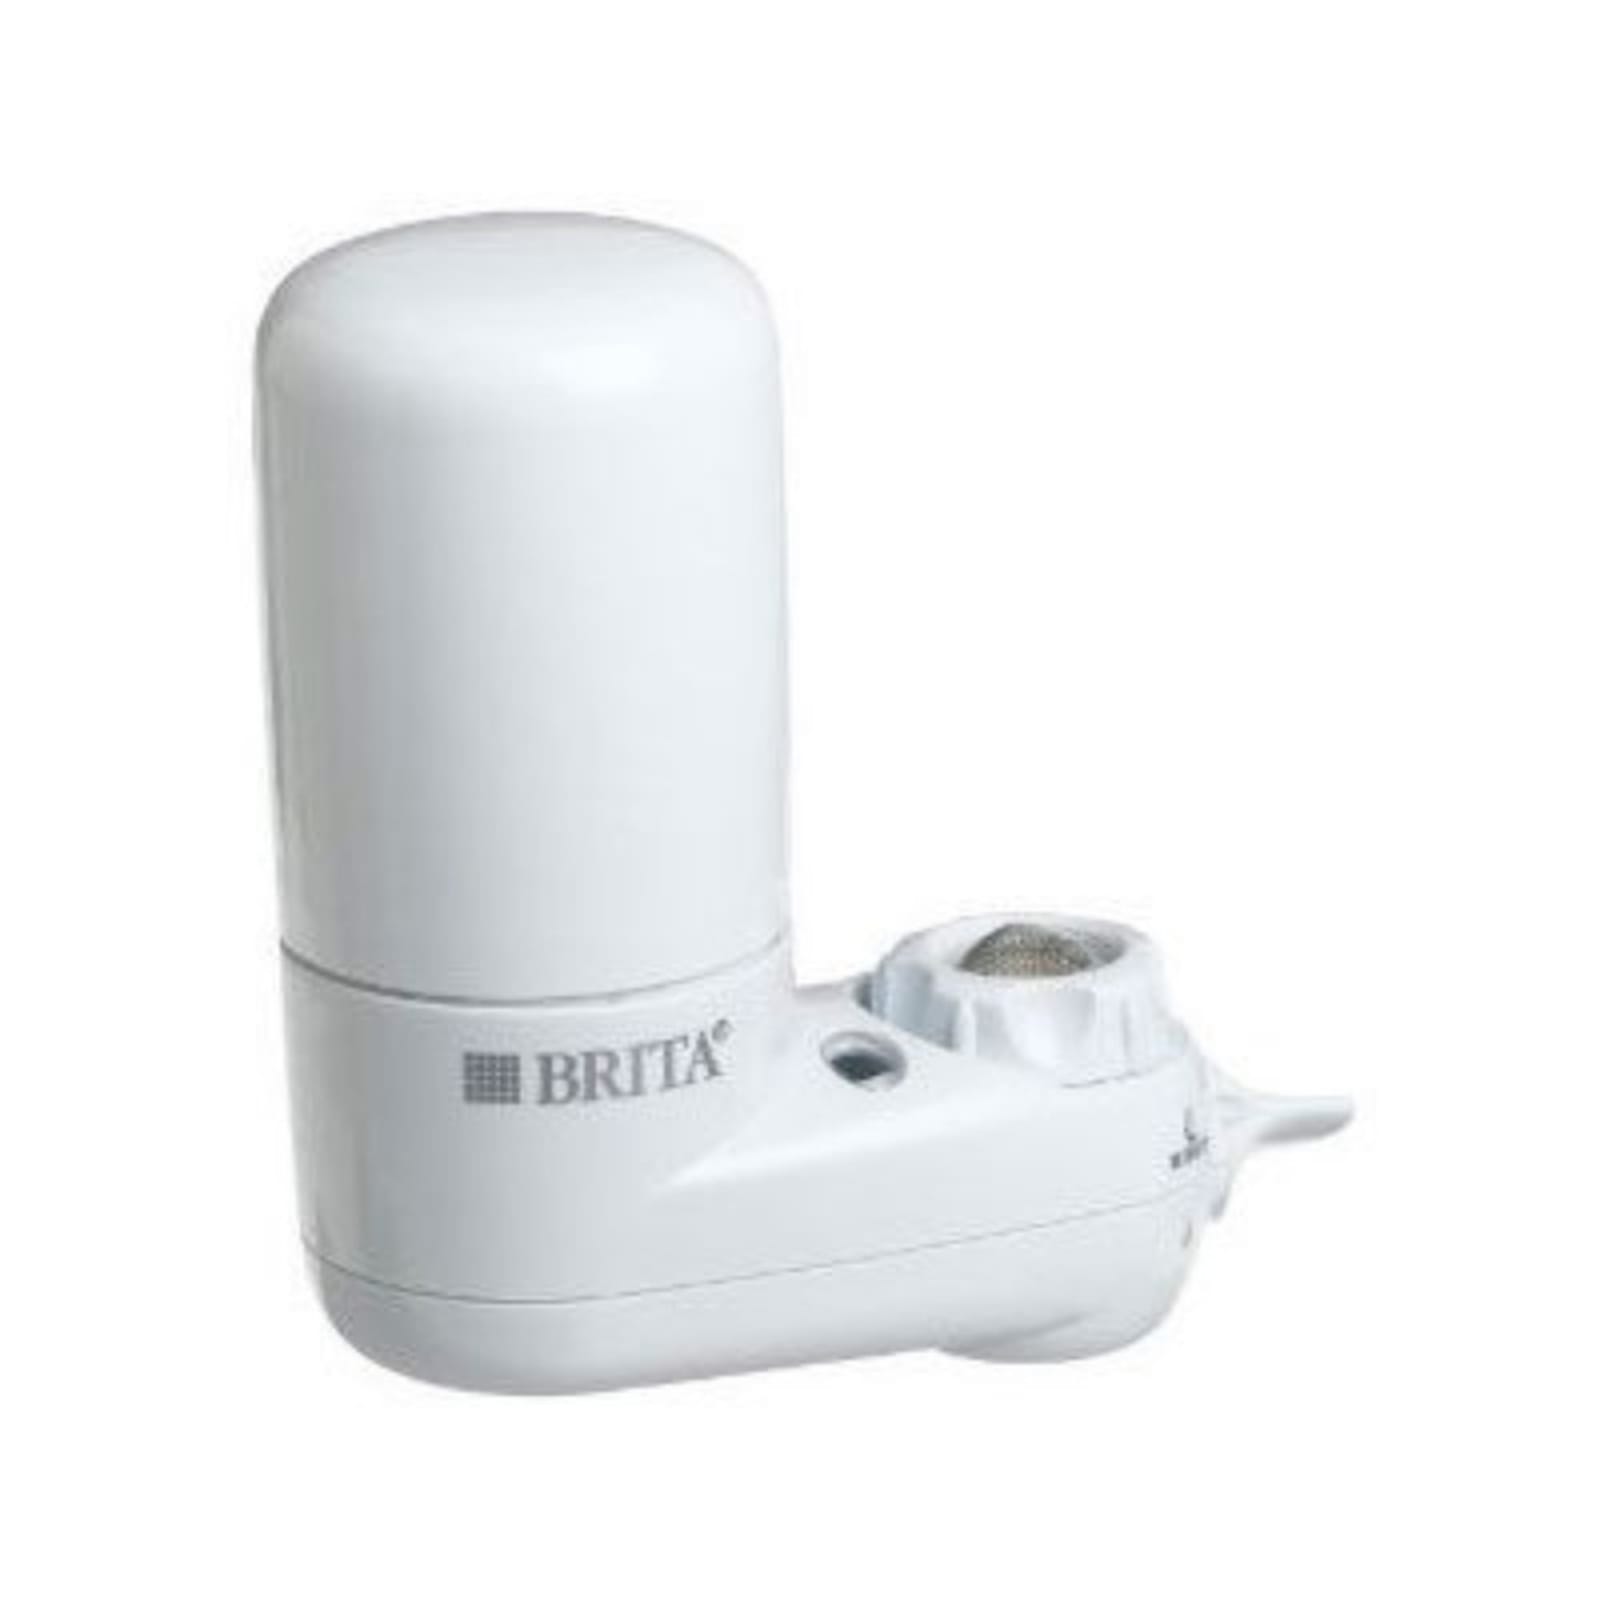 Details about Brita Tap Water Filter System Water Faucet Filtration w/  Filter